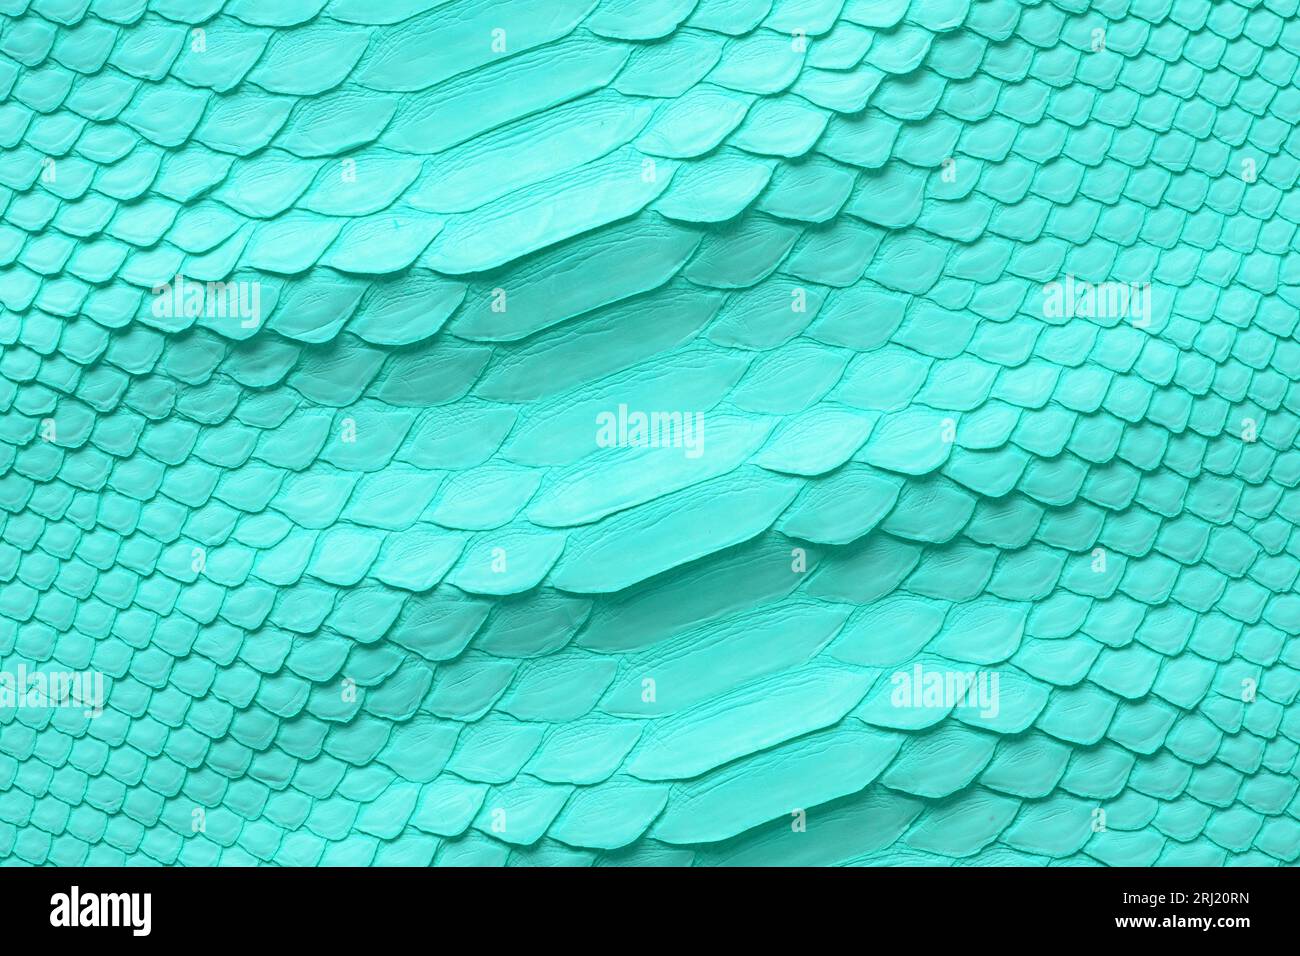 light green snake skin texture, turquoise leather background Stock ...